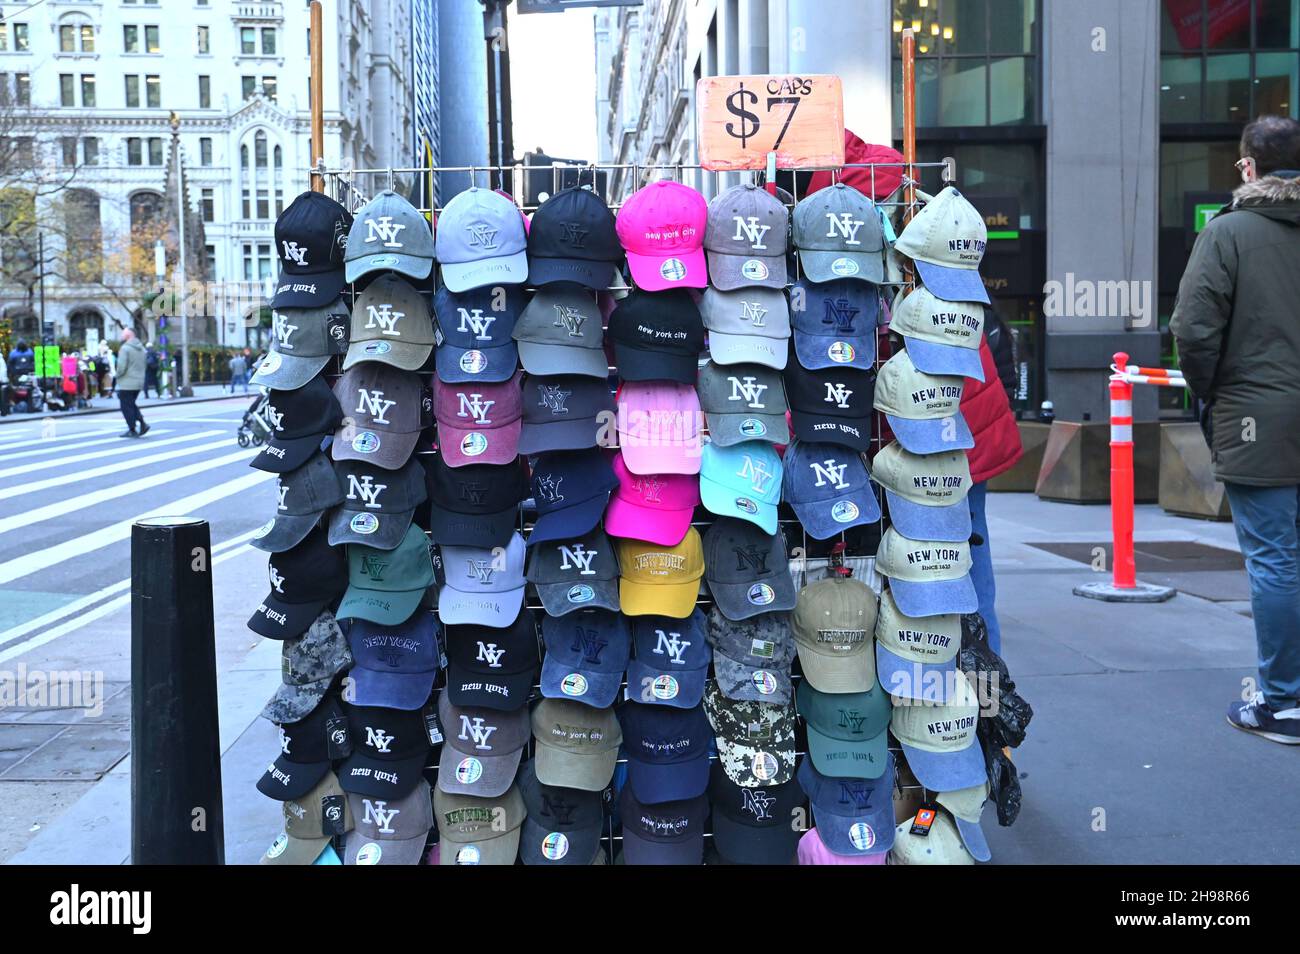 A street display of baseball hats for tourists in Mangattan, New York City, NY, USA. Stock Photo